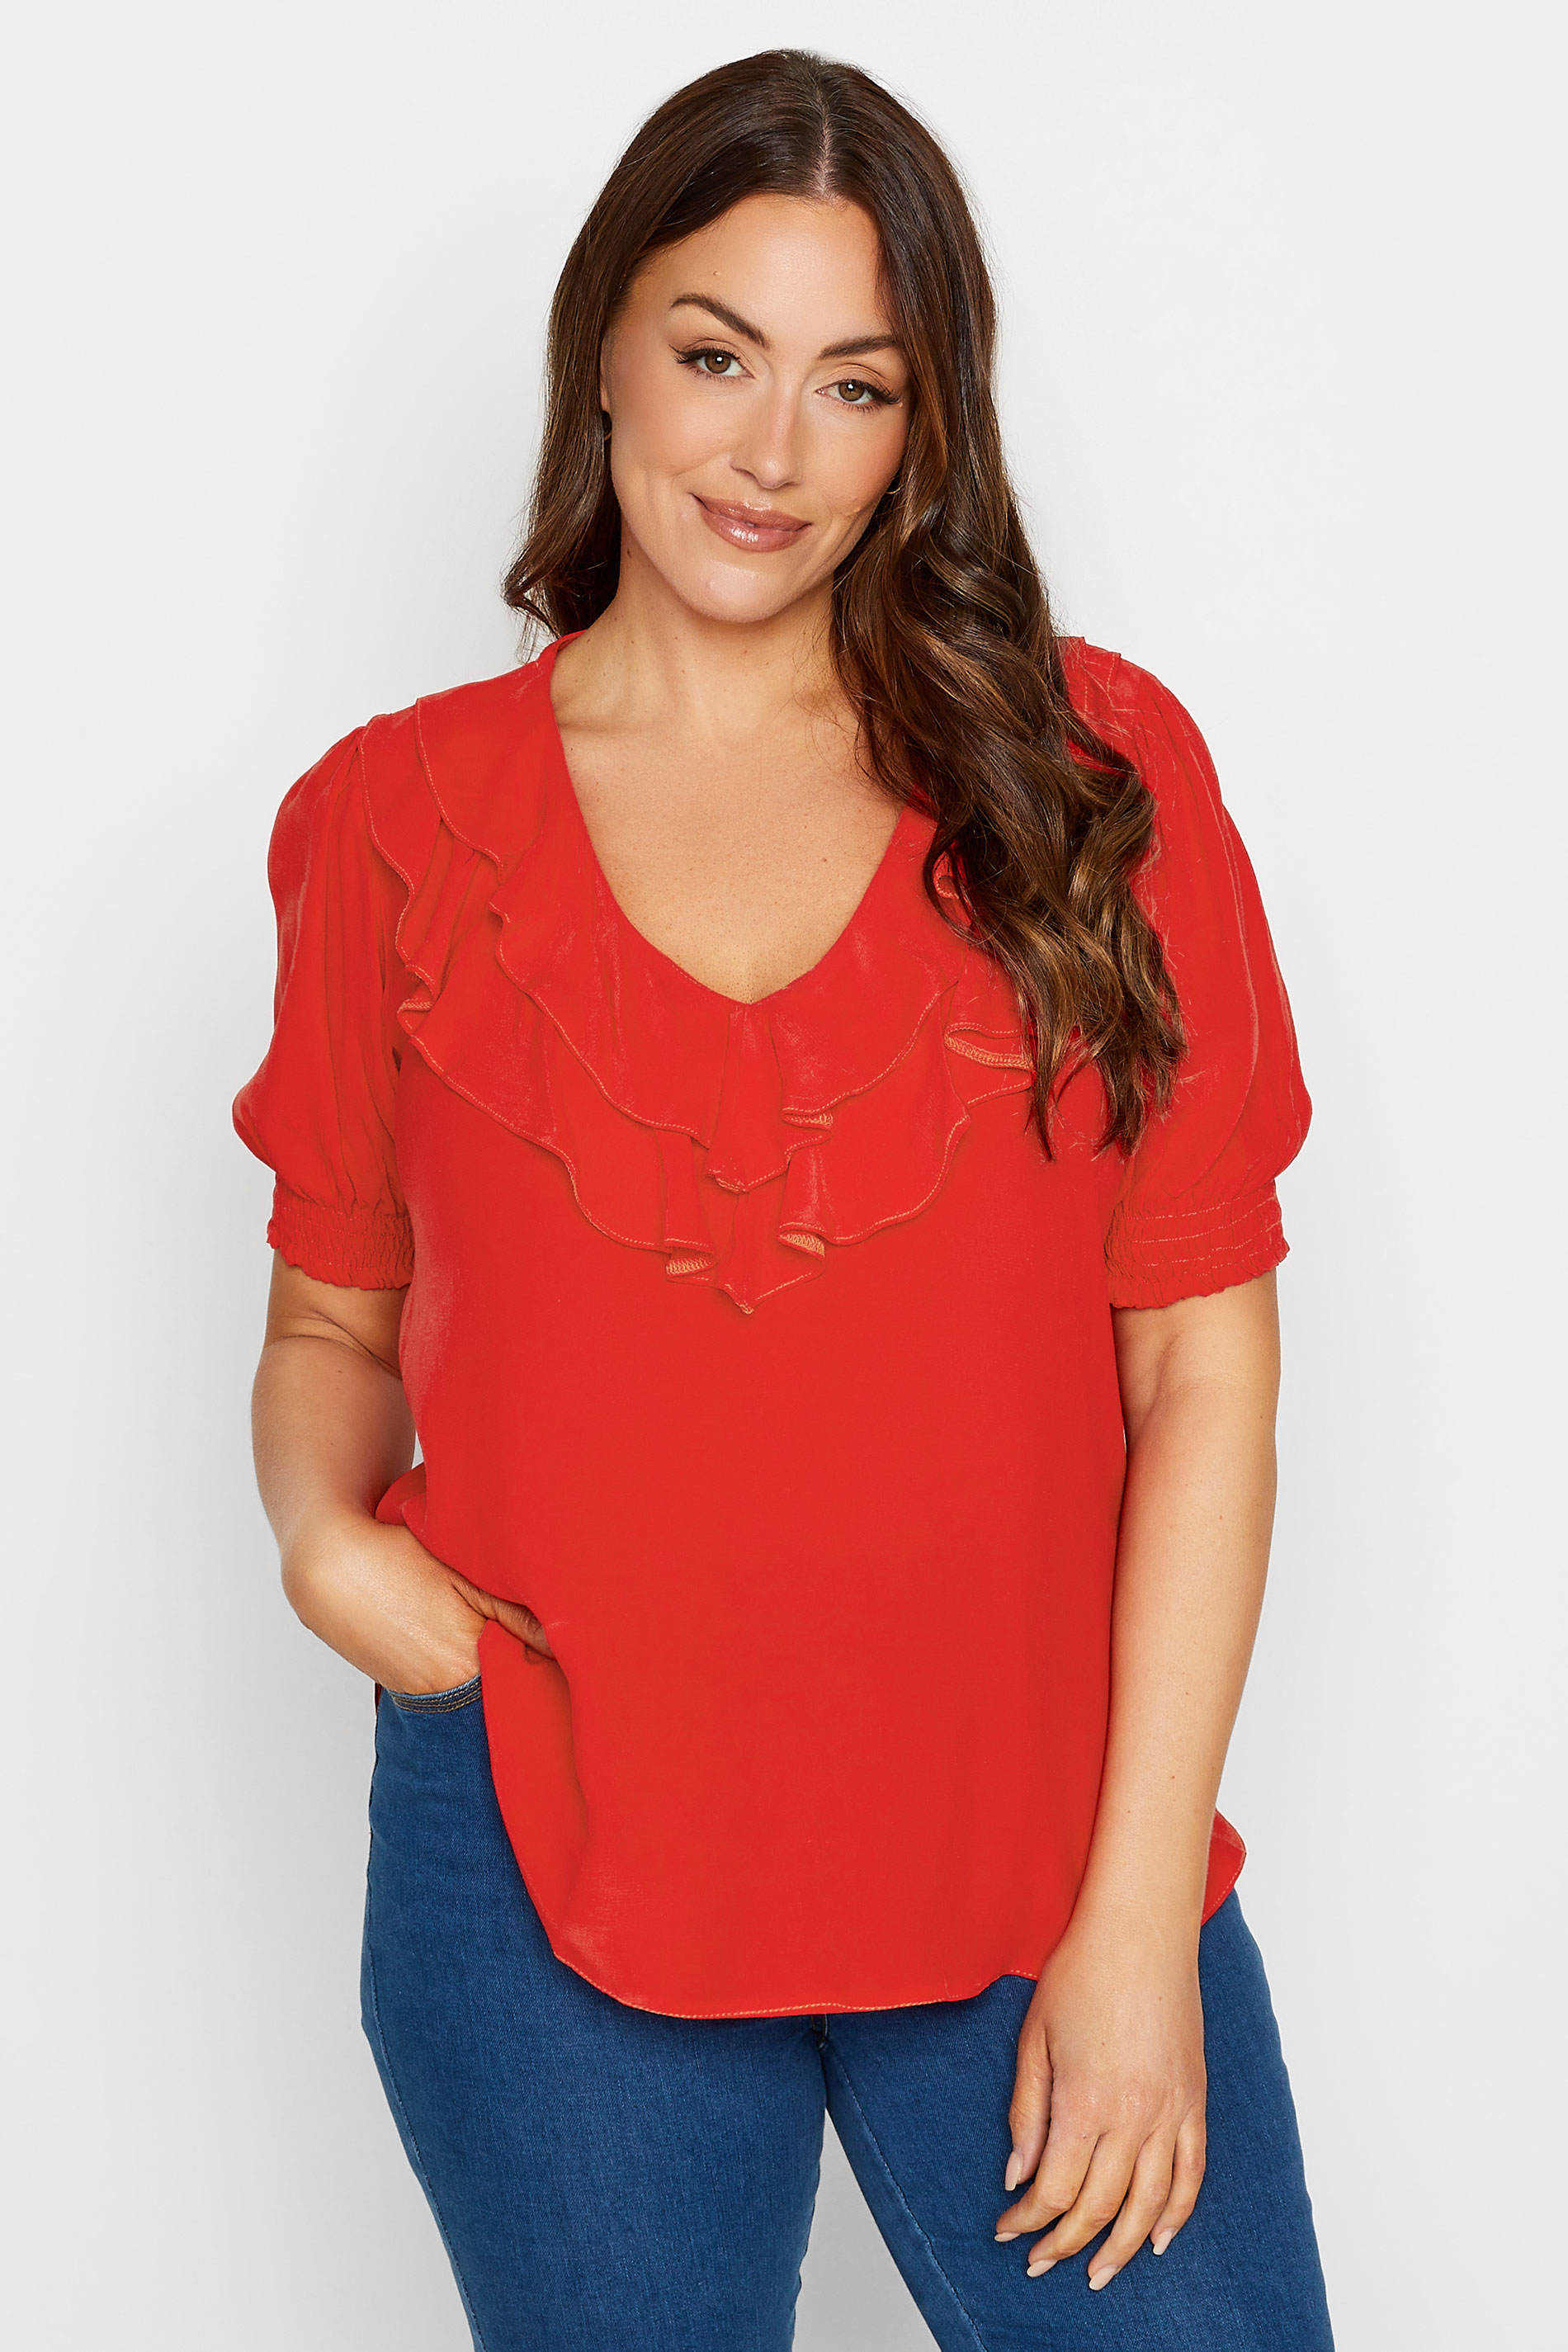 M&Co Red Frill Front Blouse | M&Co 1